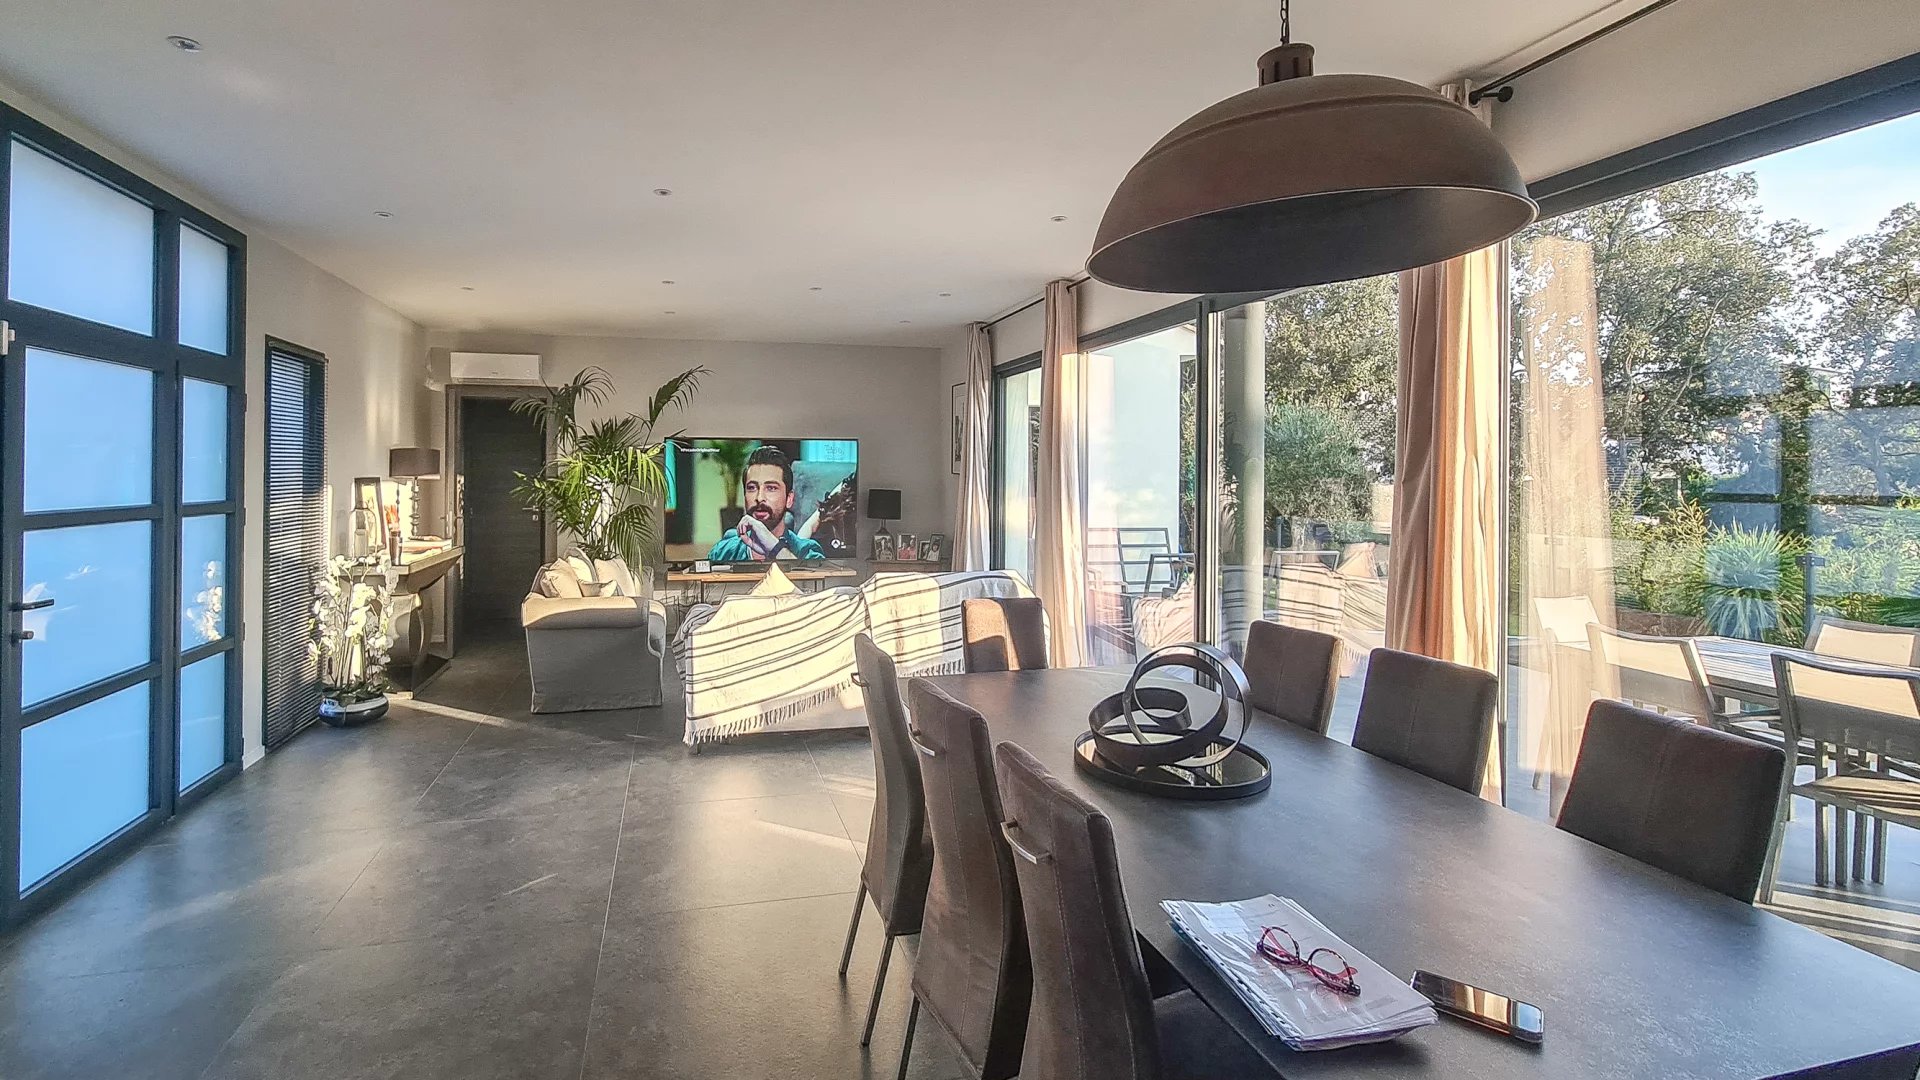 MODERN VILLA ON SALE AT FREJUS VALESCURE  NEAR THE GOLF COURSES